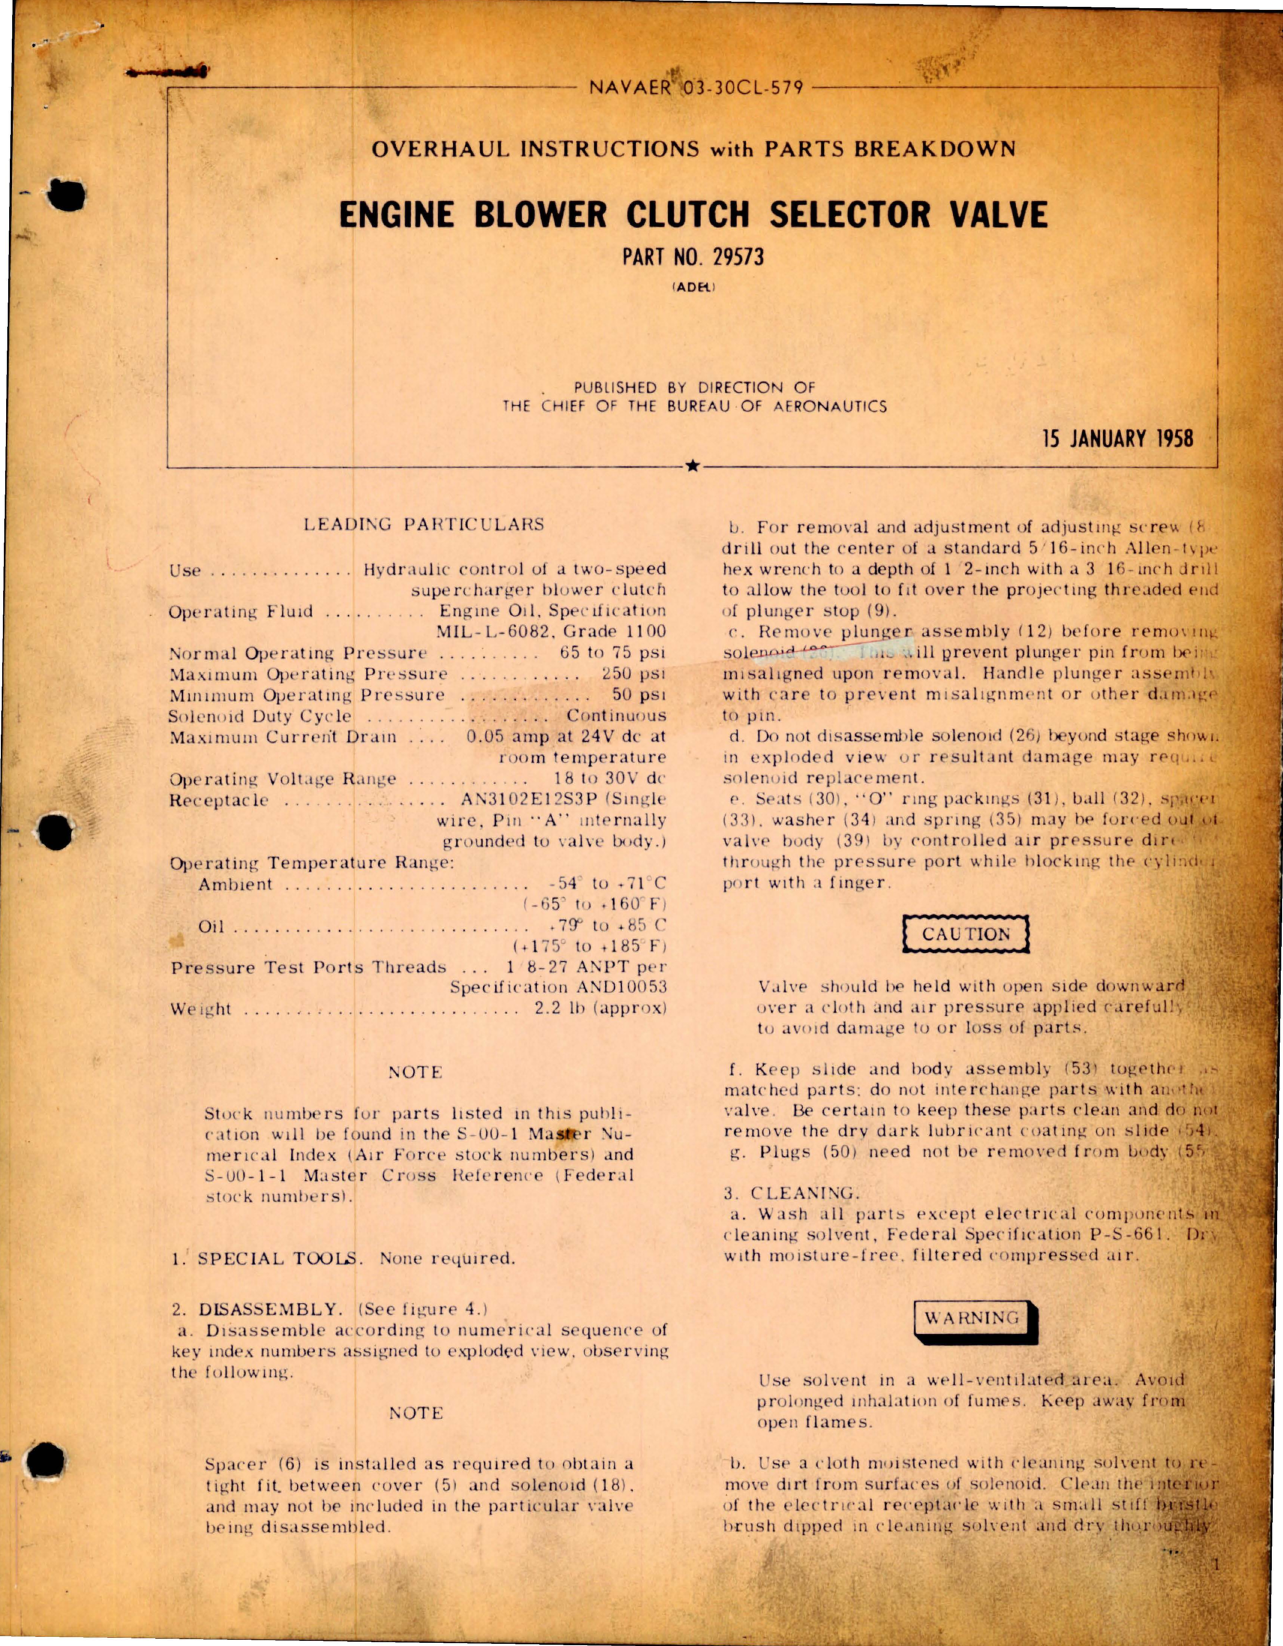 Sample page 1 from AirCorps Library document: Overhaul Instructions with Parts for Engine Blower Clutch Selector Valve - Part 29573